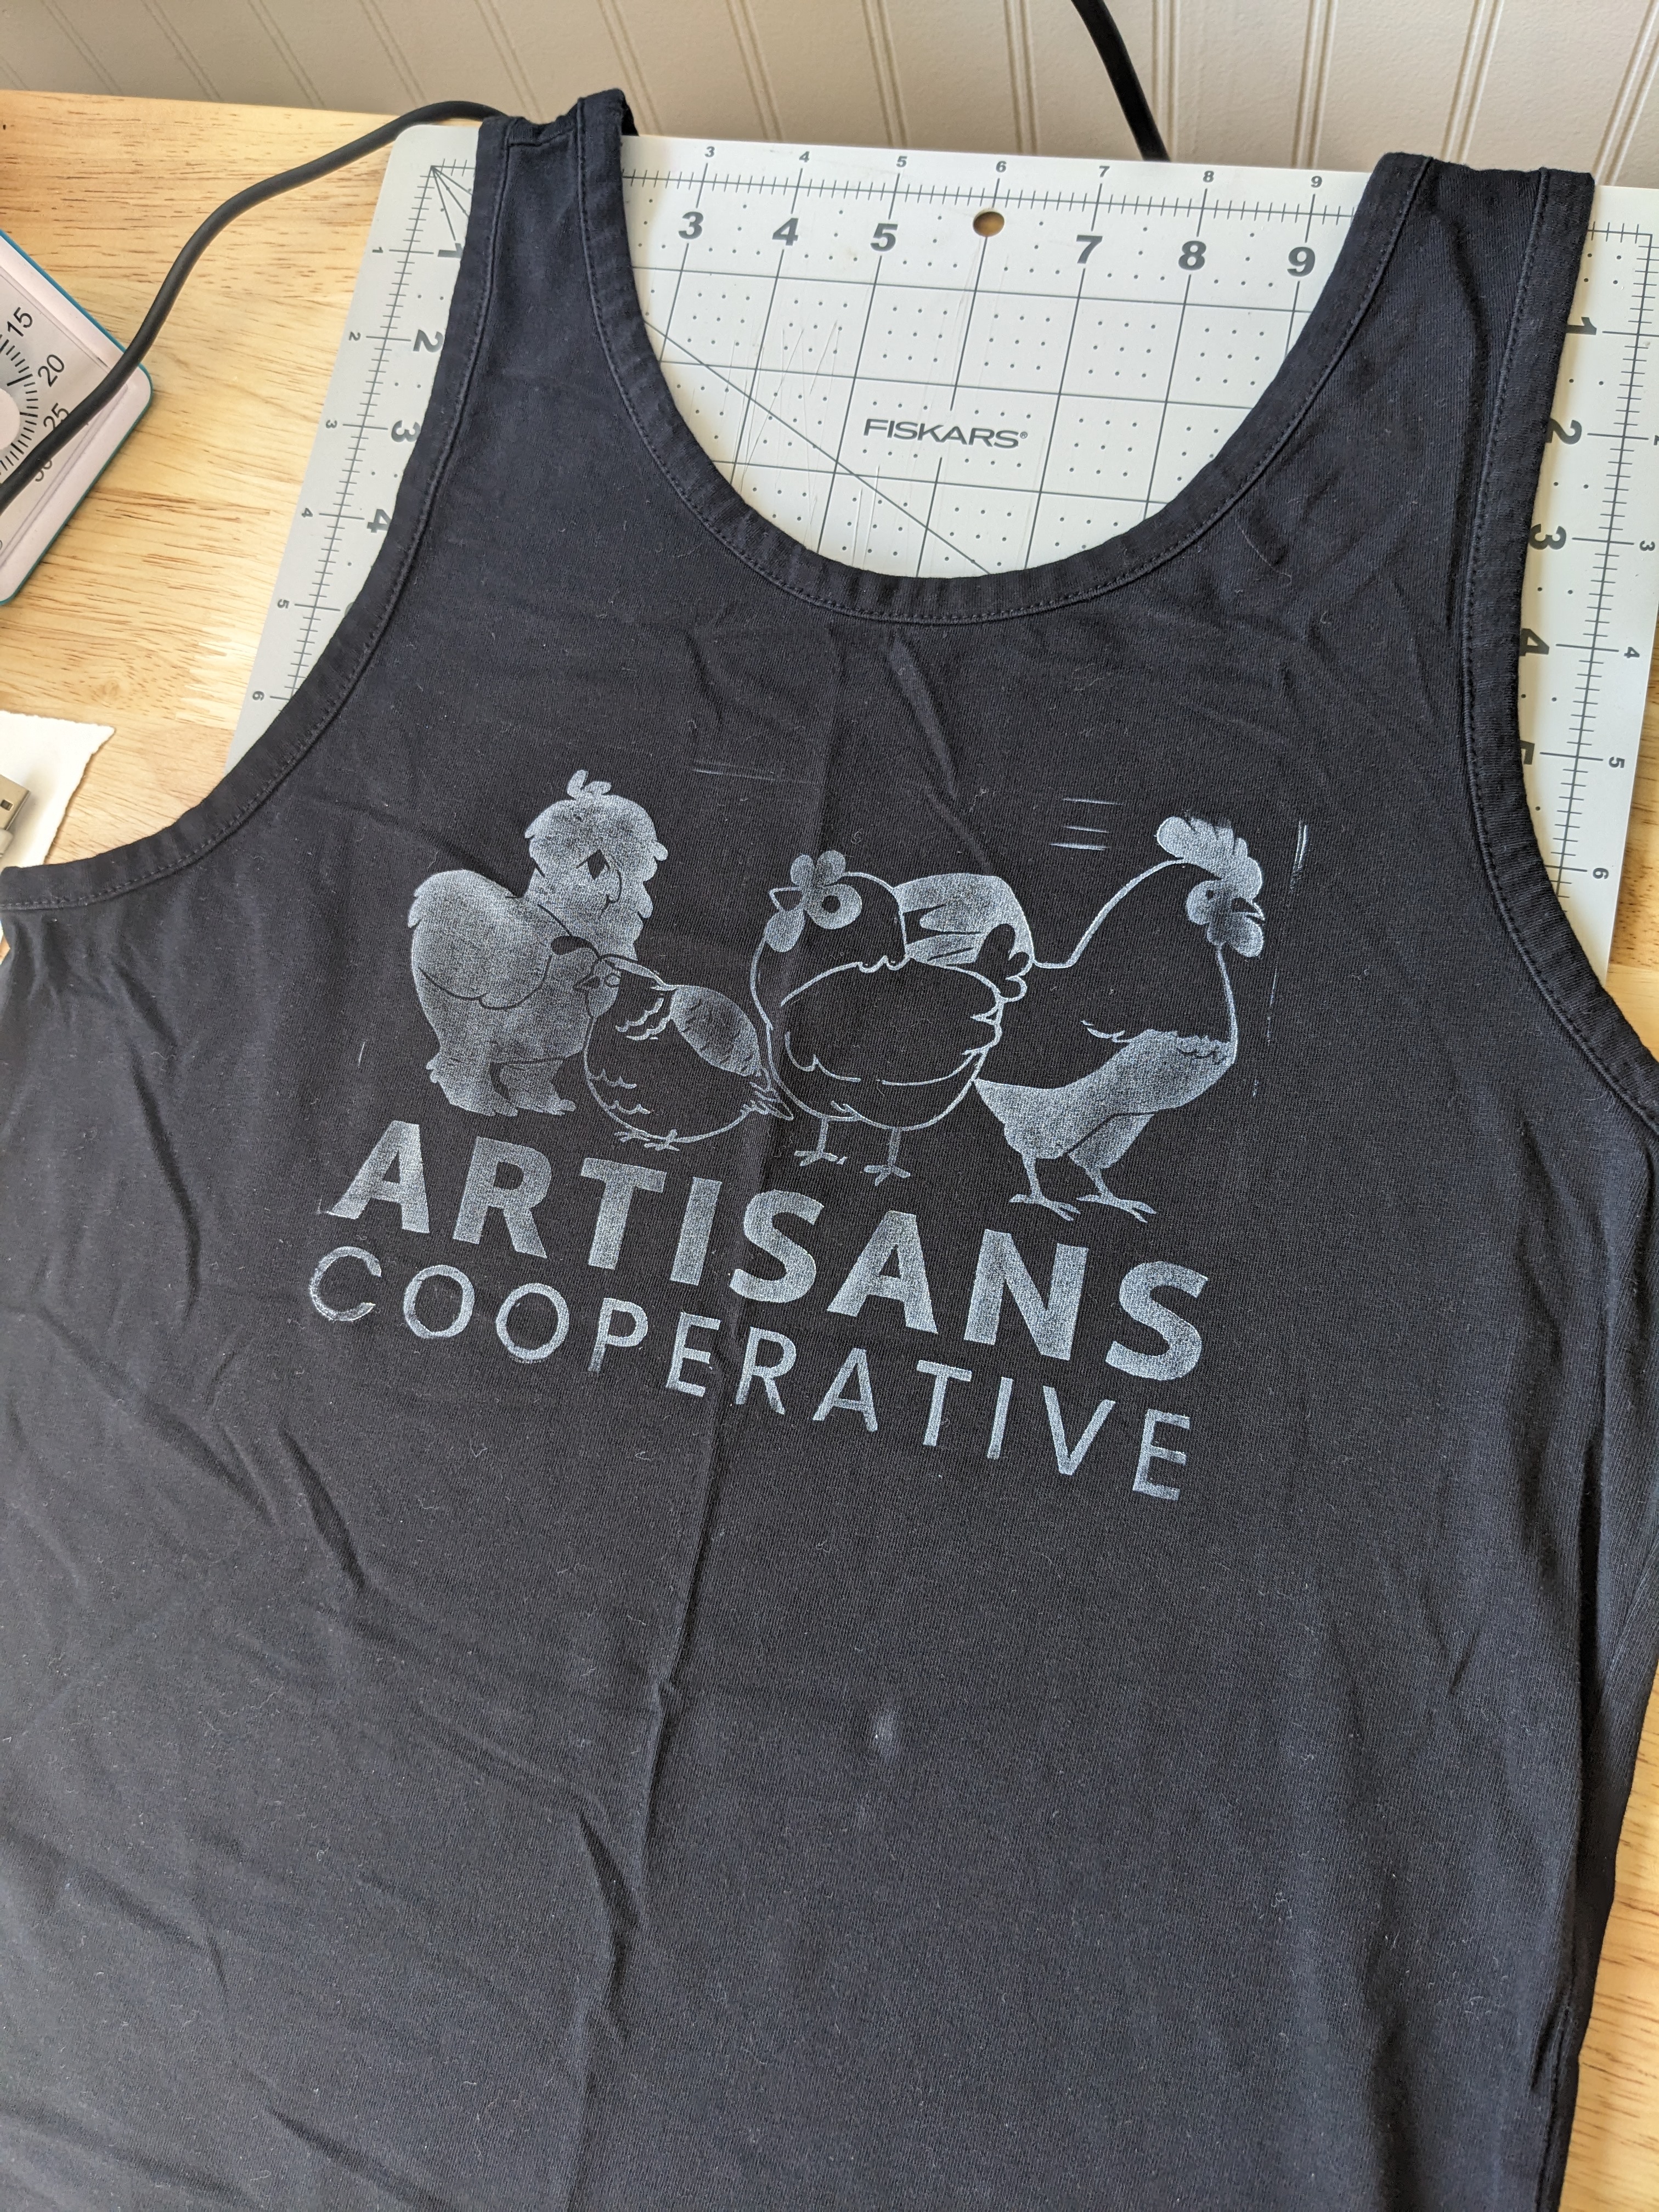 A black tank top laid on a desk. In white ink it reads 'Artisans Cooperative' with a print of some chickens and a quail.